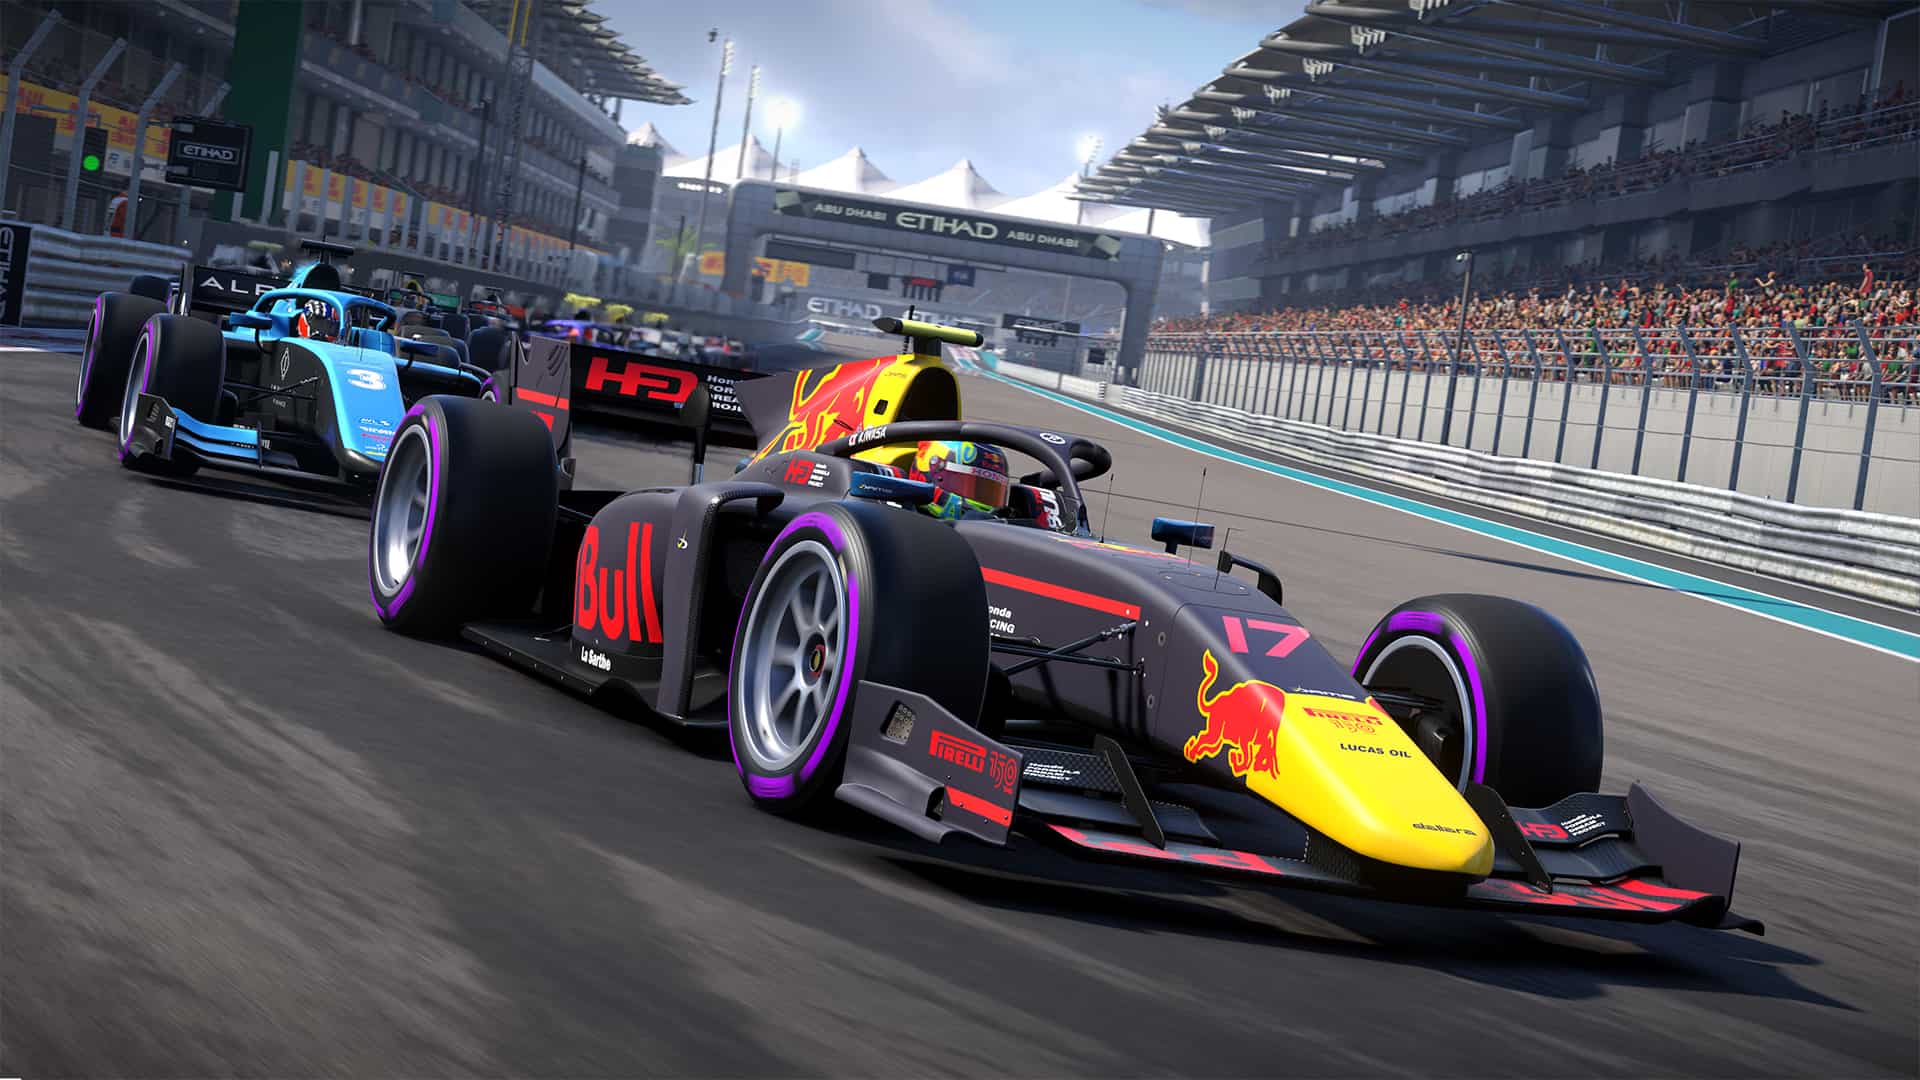 Upcoming F1 22 updates includes F2, starting 11th October